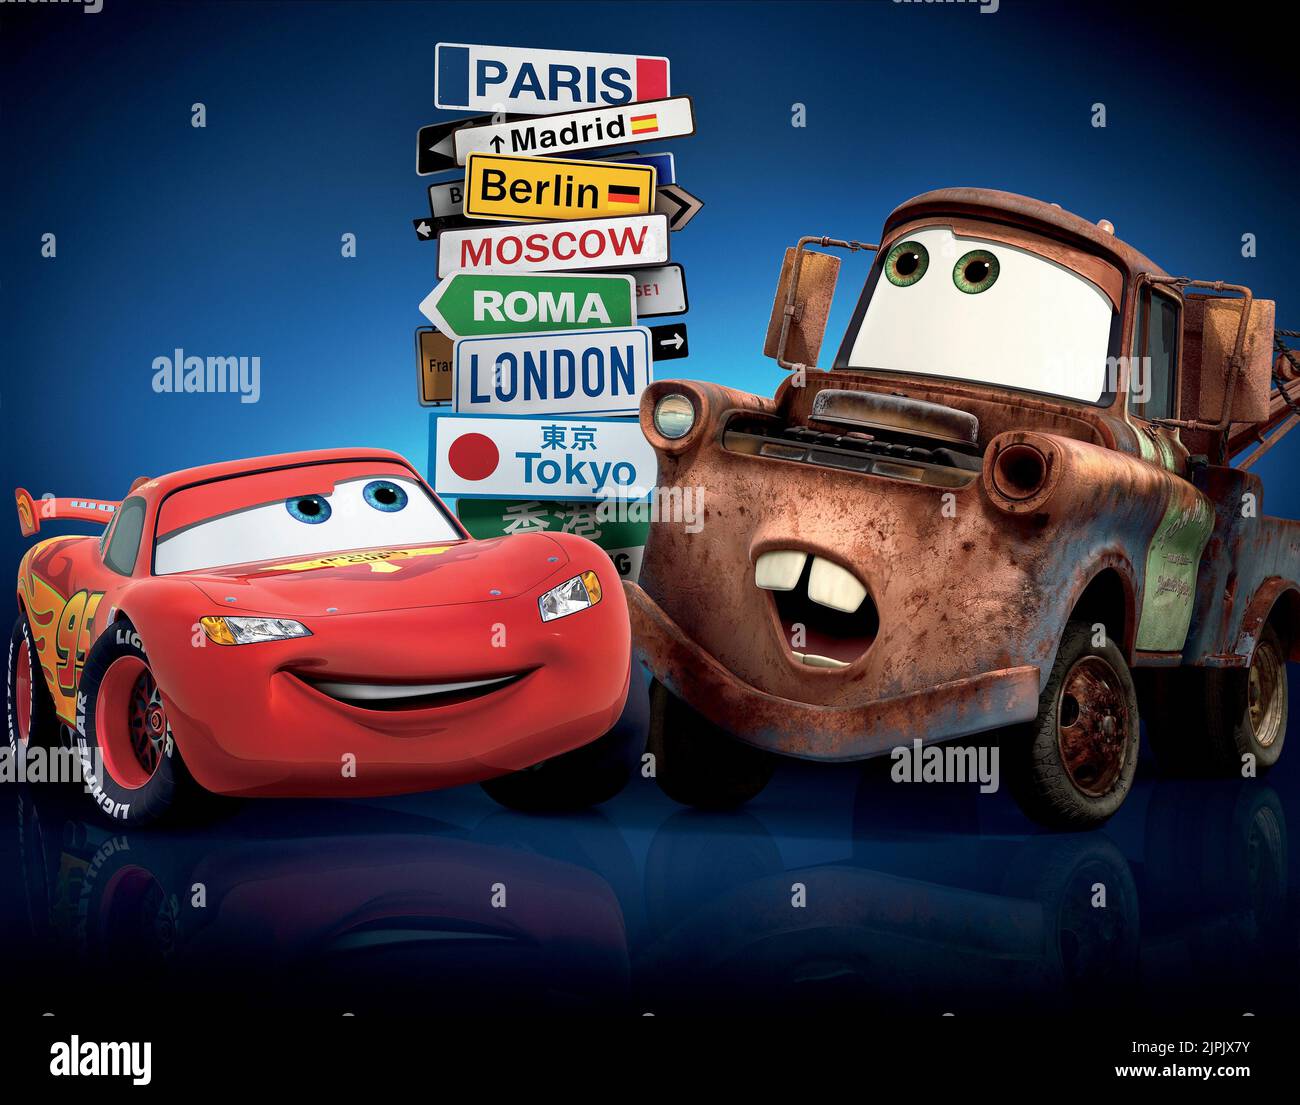 Cool Story 2 (Toy Story 2) -  in 2023  Toy story, Thomas and  friends, Lightning mcqueen